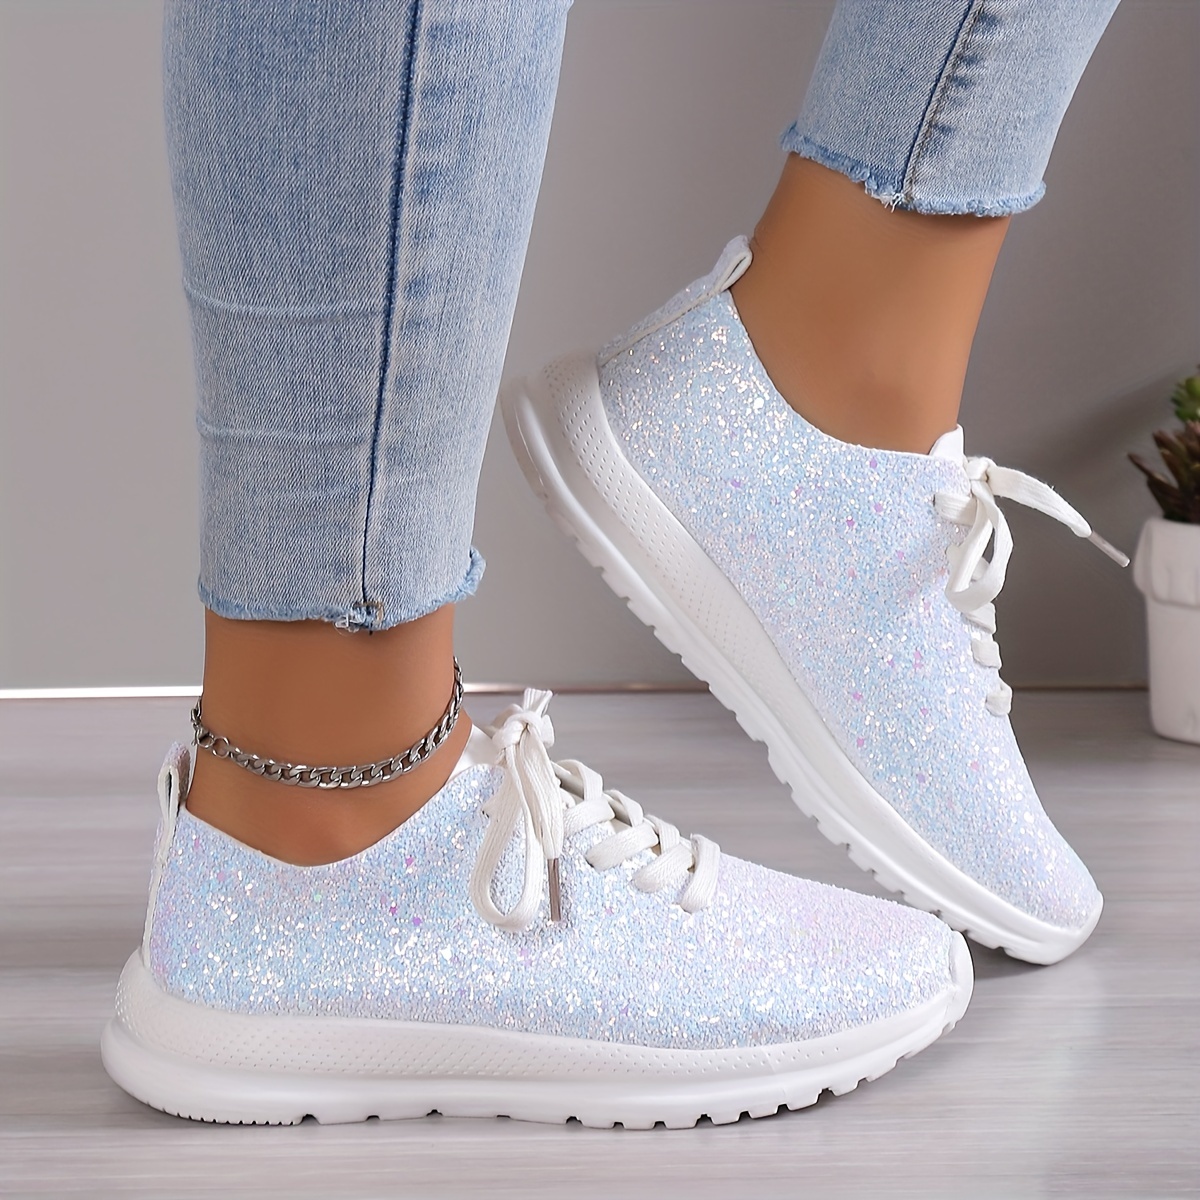 Glitter Trainers & Heels, Sparkly Sandals & Glitter Shoes